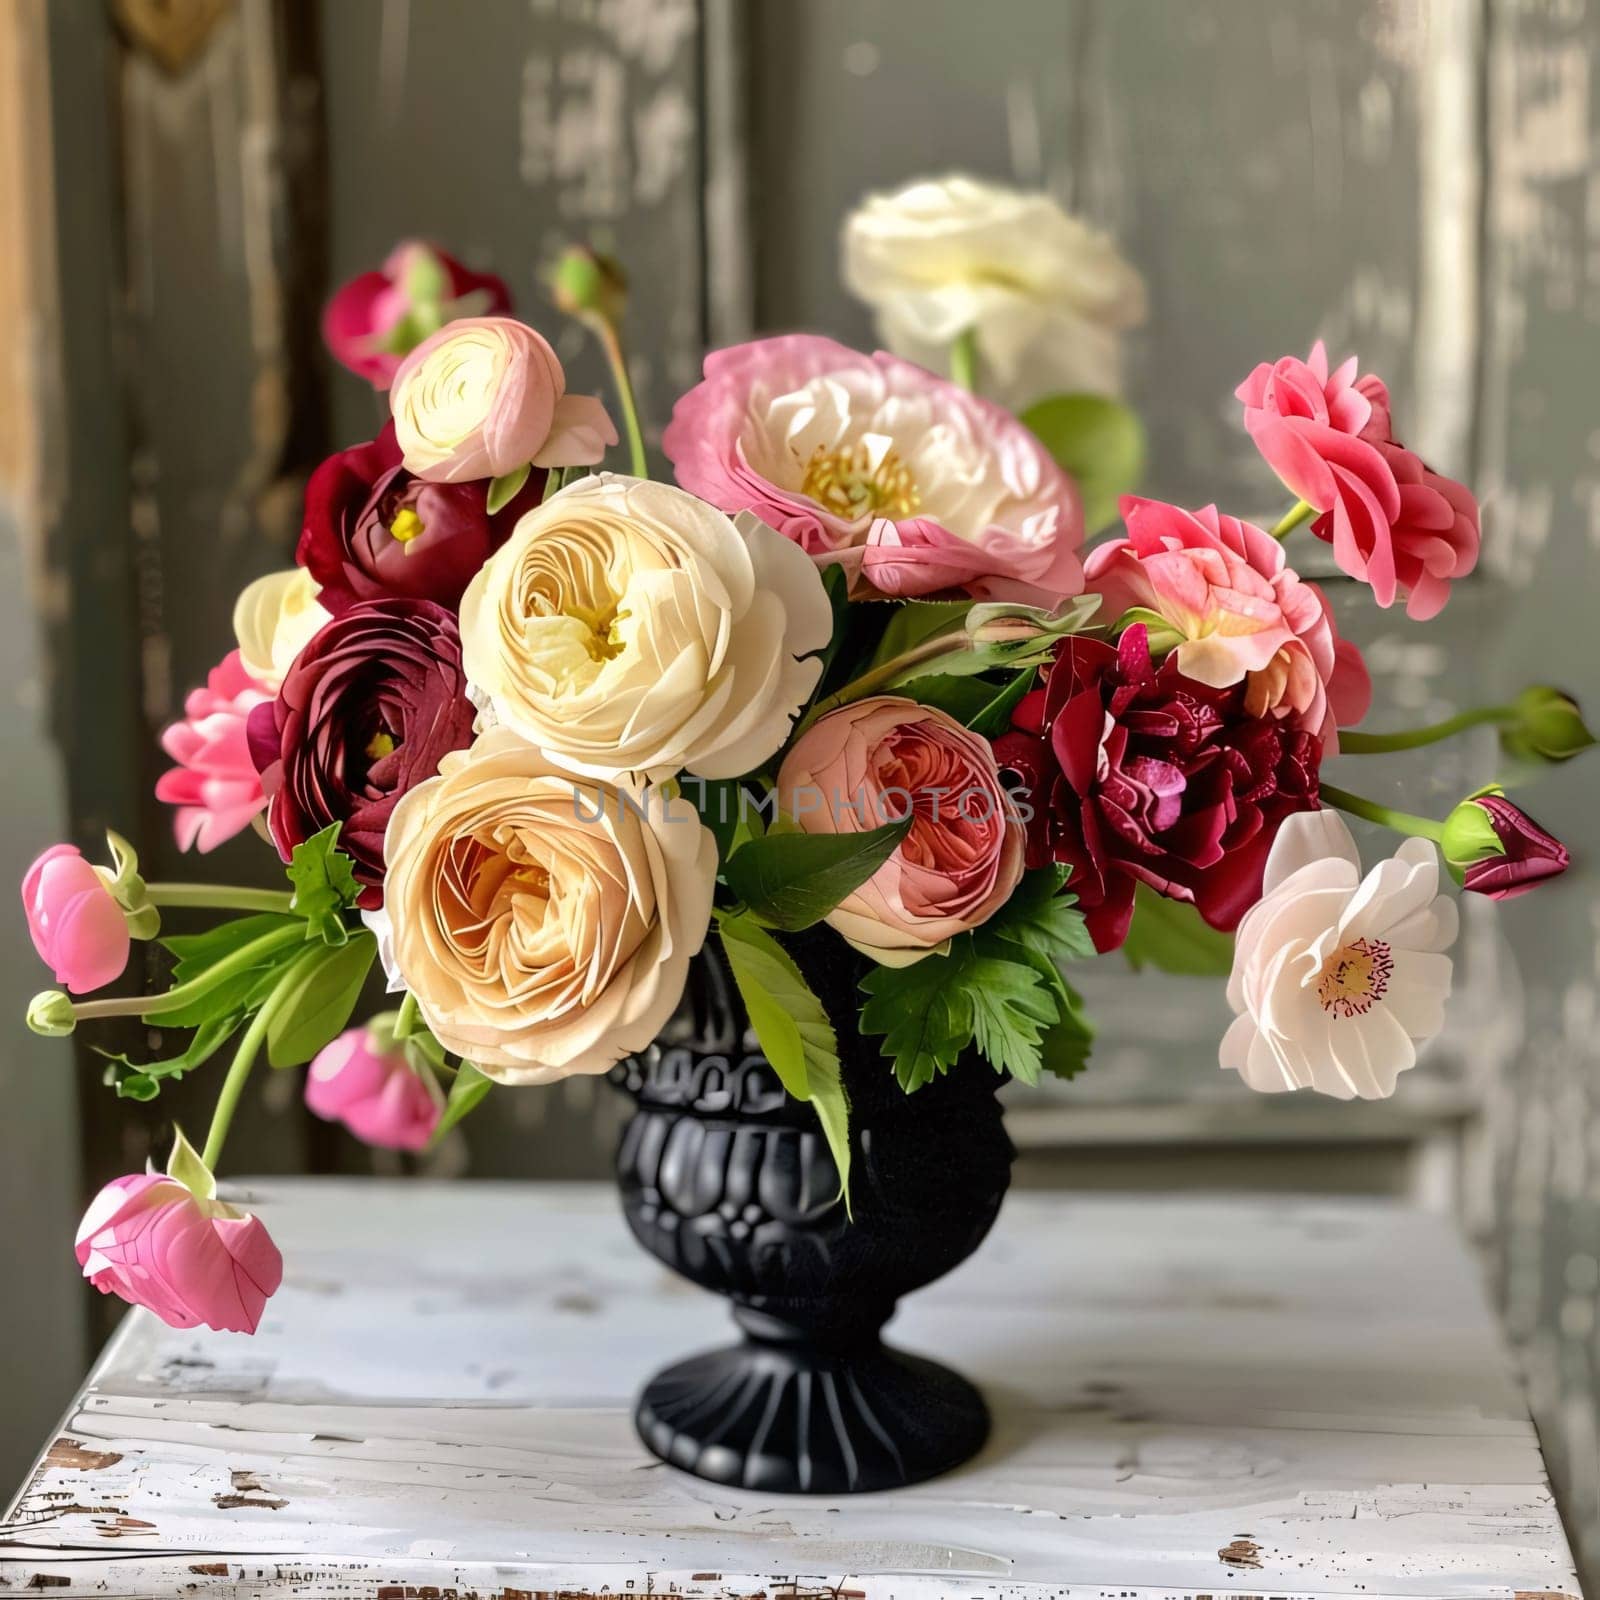 Bouquet of colorful rose flowers in a black vase on a wooden background. Flowering flowers, a symbol of spring, new life. A joyful time of nature waking up to life.